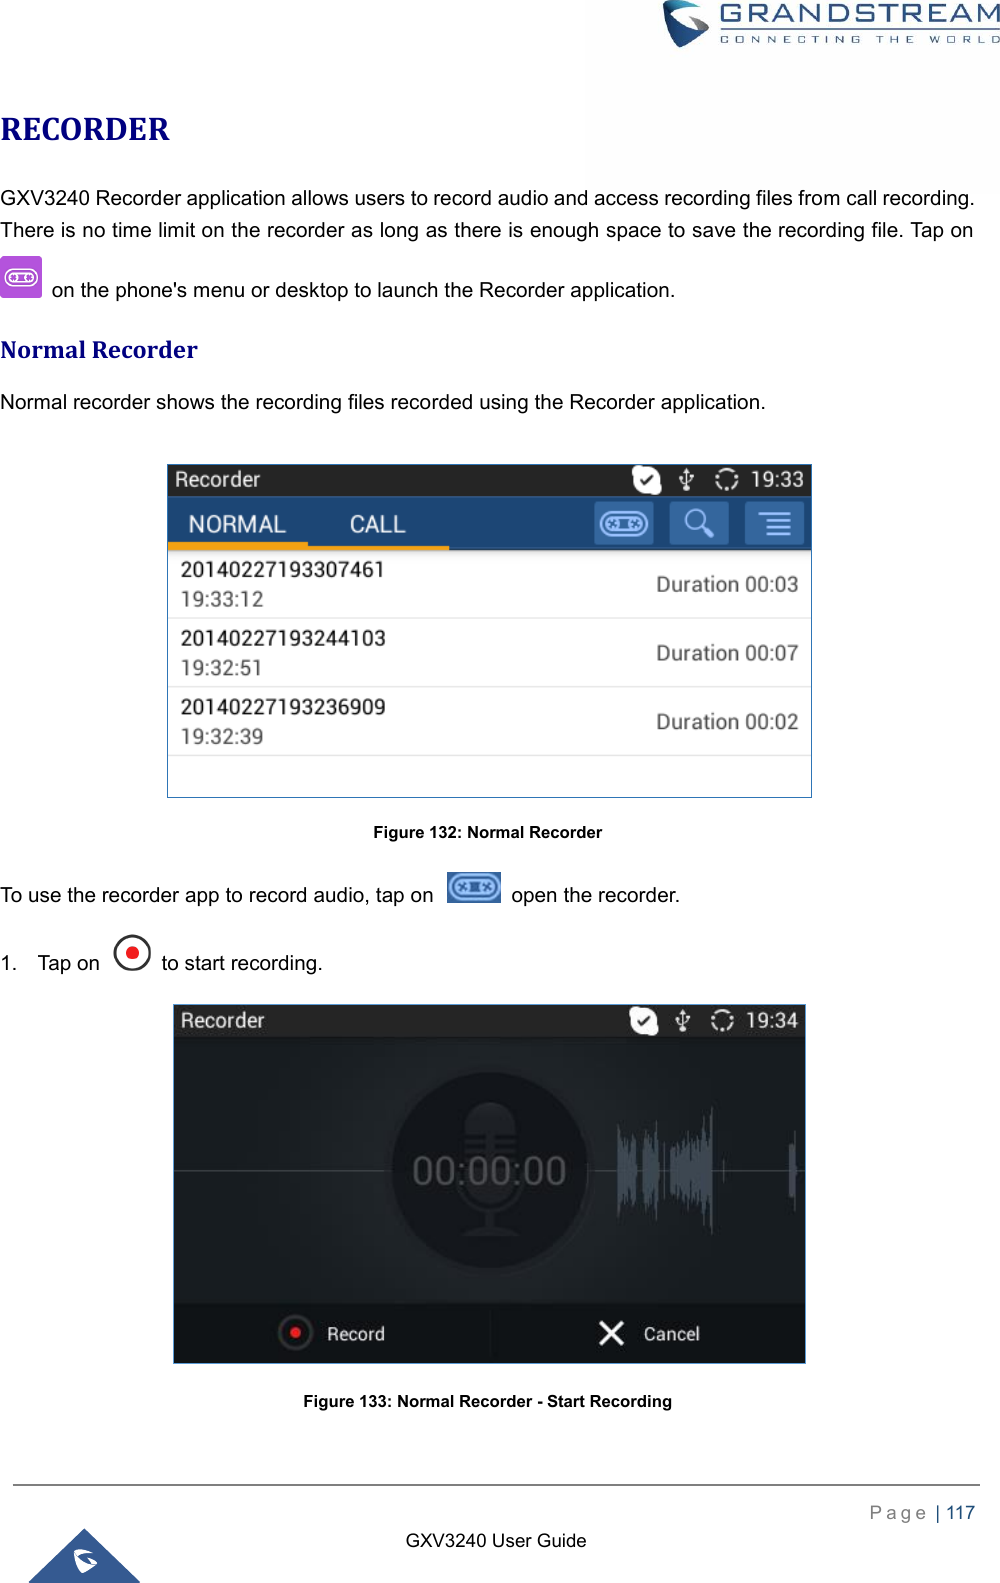    P a g e  | 117    GXV3240 User Guide  RECORDER GXV3240 Recorder application allows users to record audio and access recording files from call recording. There is no time limit on the recorder as long as there is enough space to save the recording file. Tap on   on the phone&apos;s menu or desktop to launch the Recorder application. Normal Recorder Normal recorder shows the recording files recorded using the Recorder application.   Figure 132: Normal Recorder To use the recorder app to record audio, tap on    open the recorder. 1.  Tap on    to start recording.  Figure 133: Normal Recorder - Start Recording 